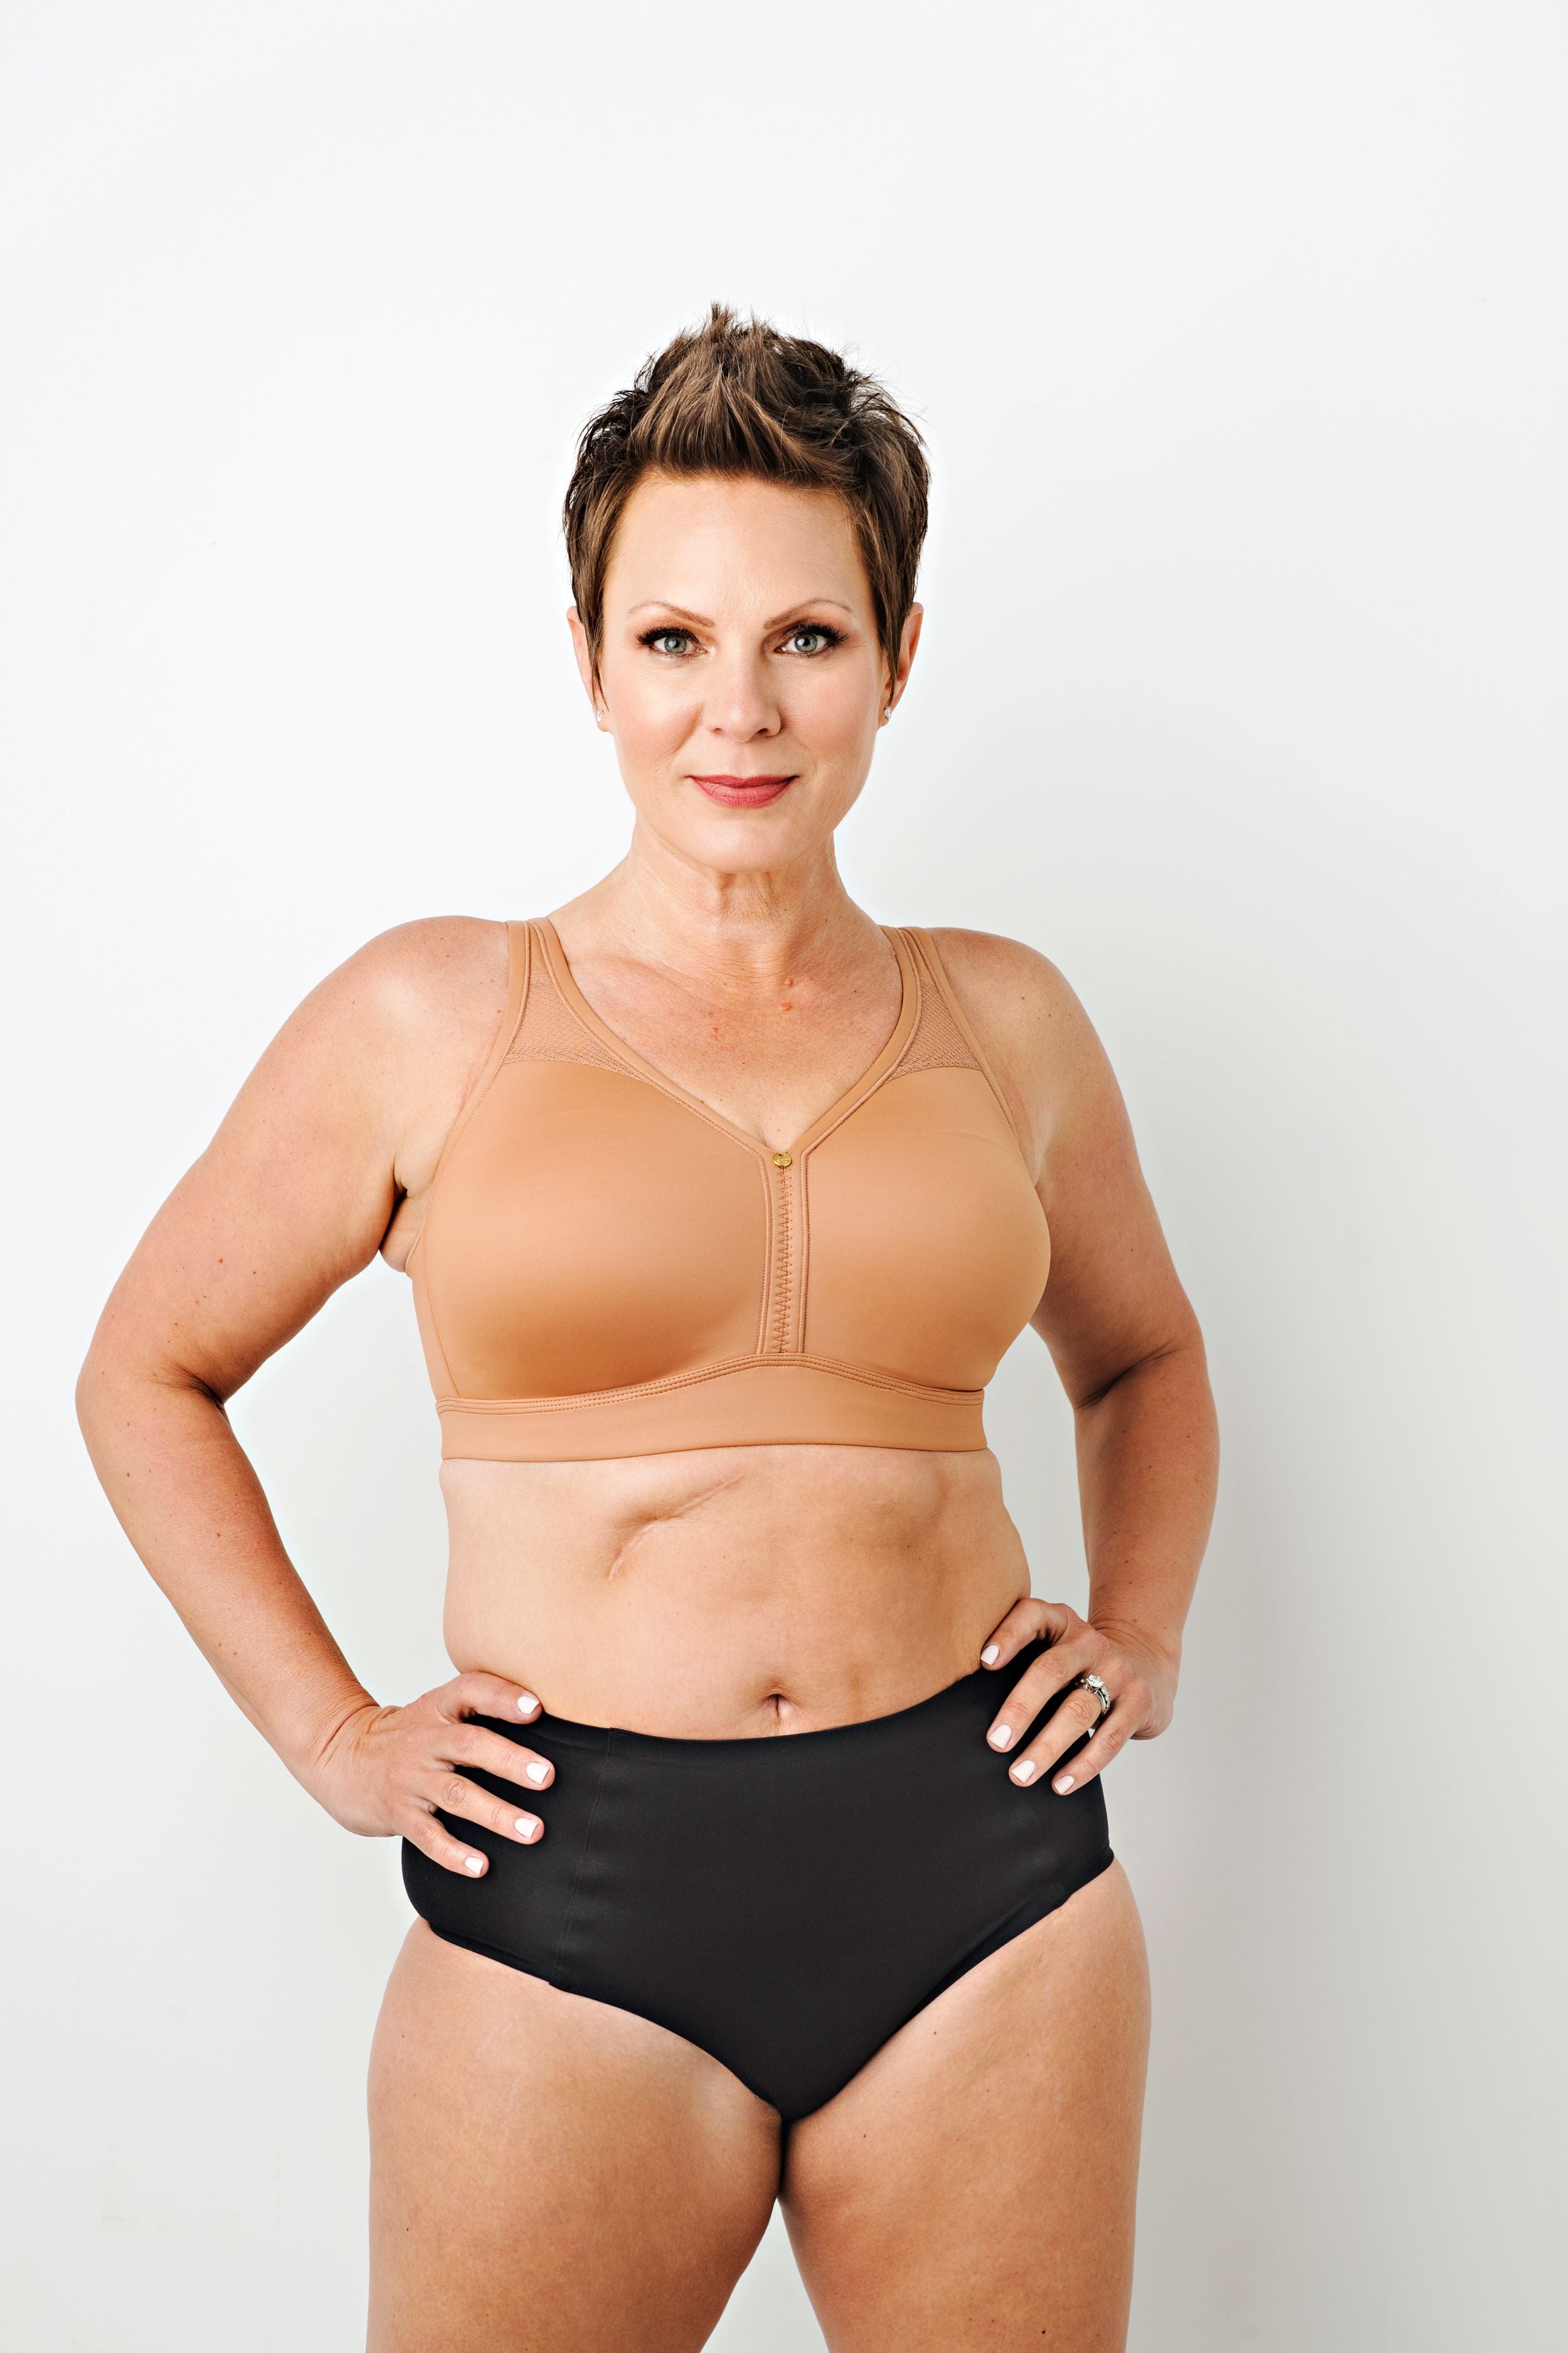 Essential Body Wear with Stacy - The ABBIE BRA is one of the reasons I  became a BRA LADY. I love it and the very different experience of shopping  for bras that